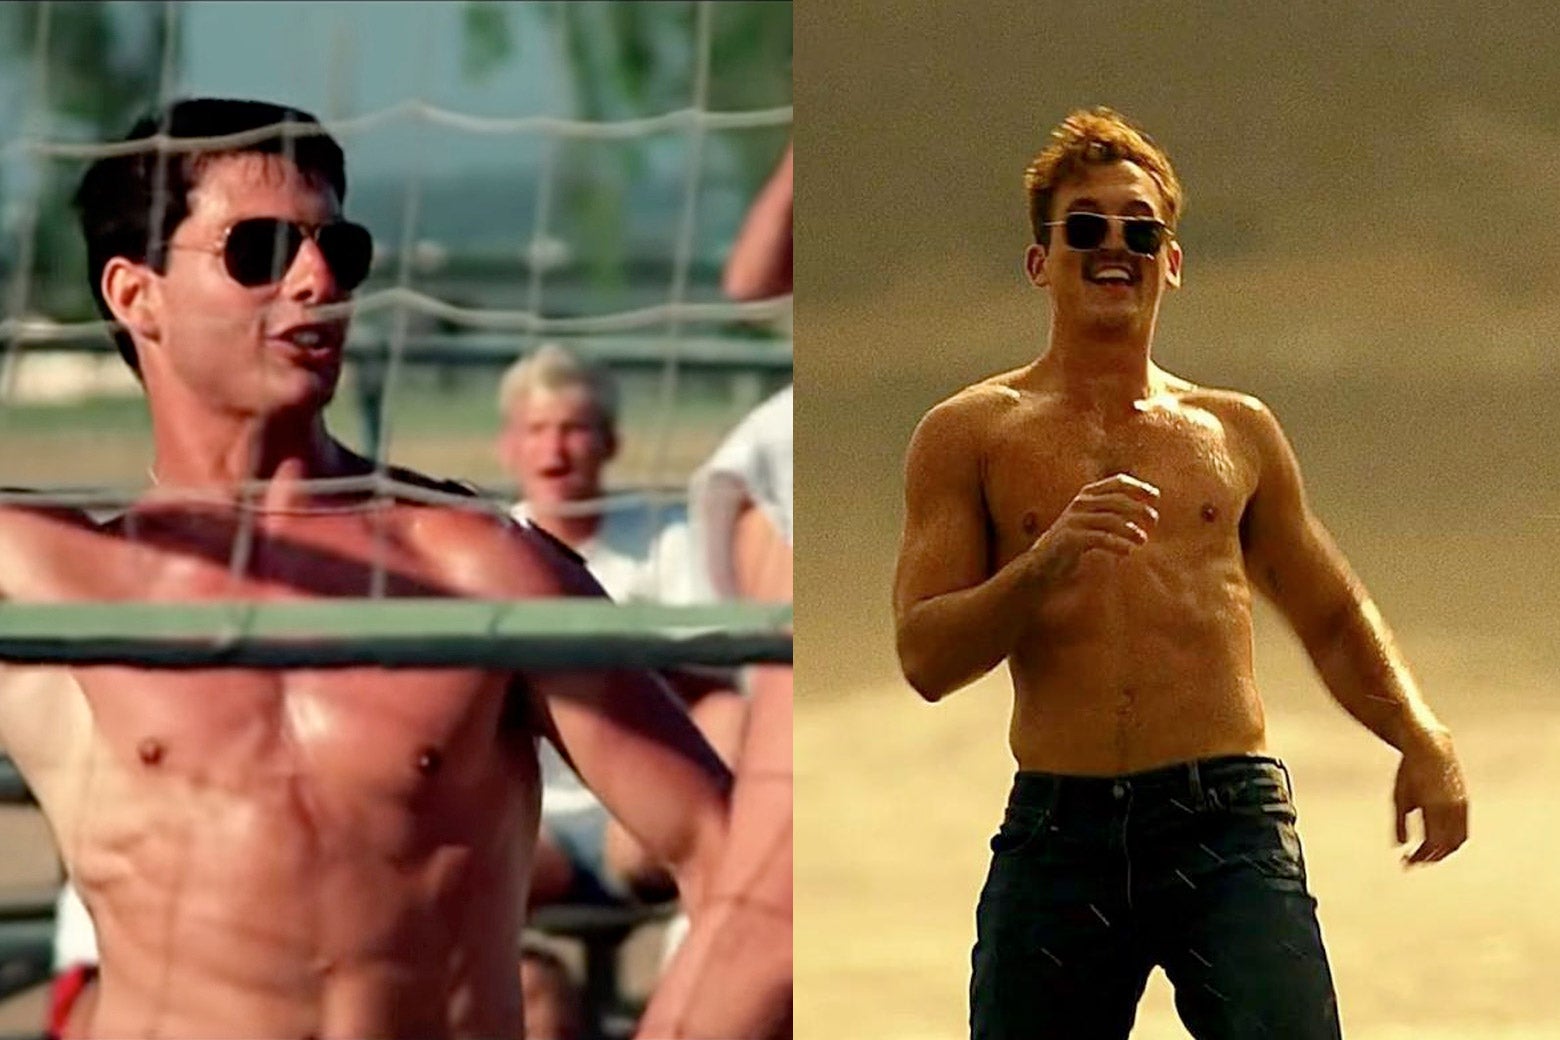 Side-by-side photos of the beach volleyball scenes from Top Gun and its sequel, featuring Tom Cruise, on the left, looking buff in aviators, and Miles Teller, looking buff in aviators, on the right